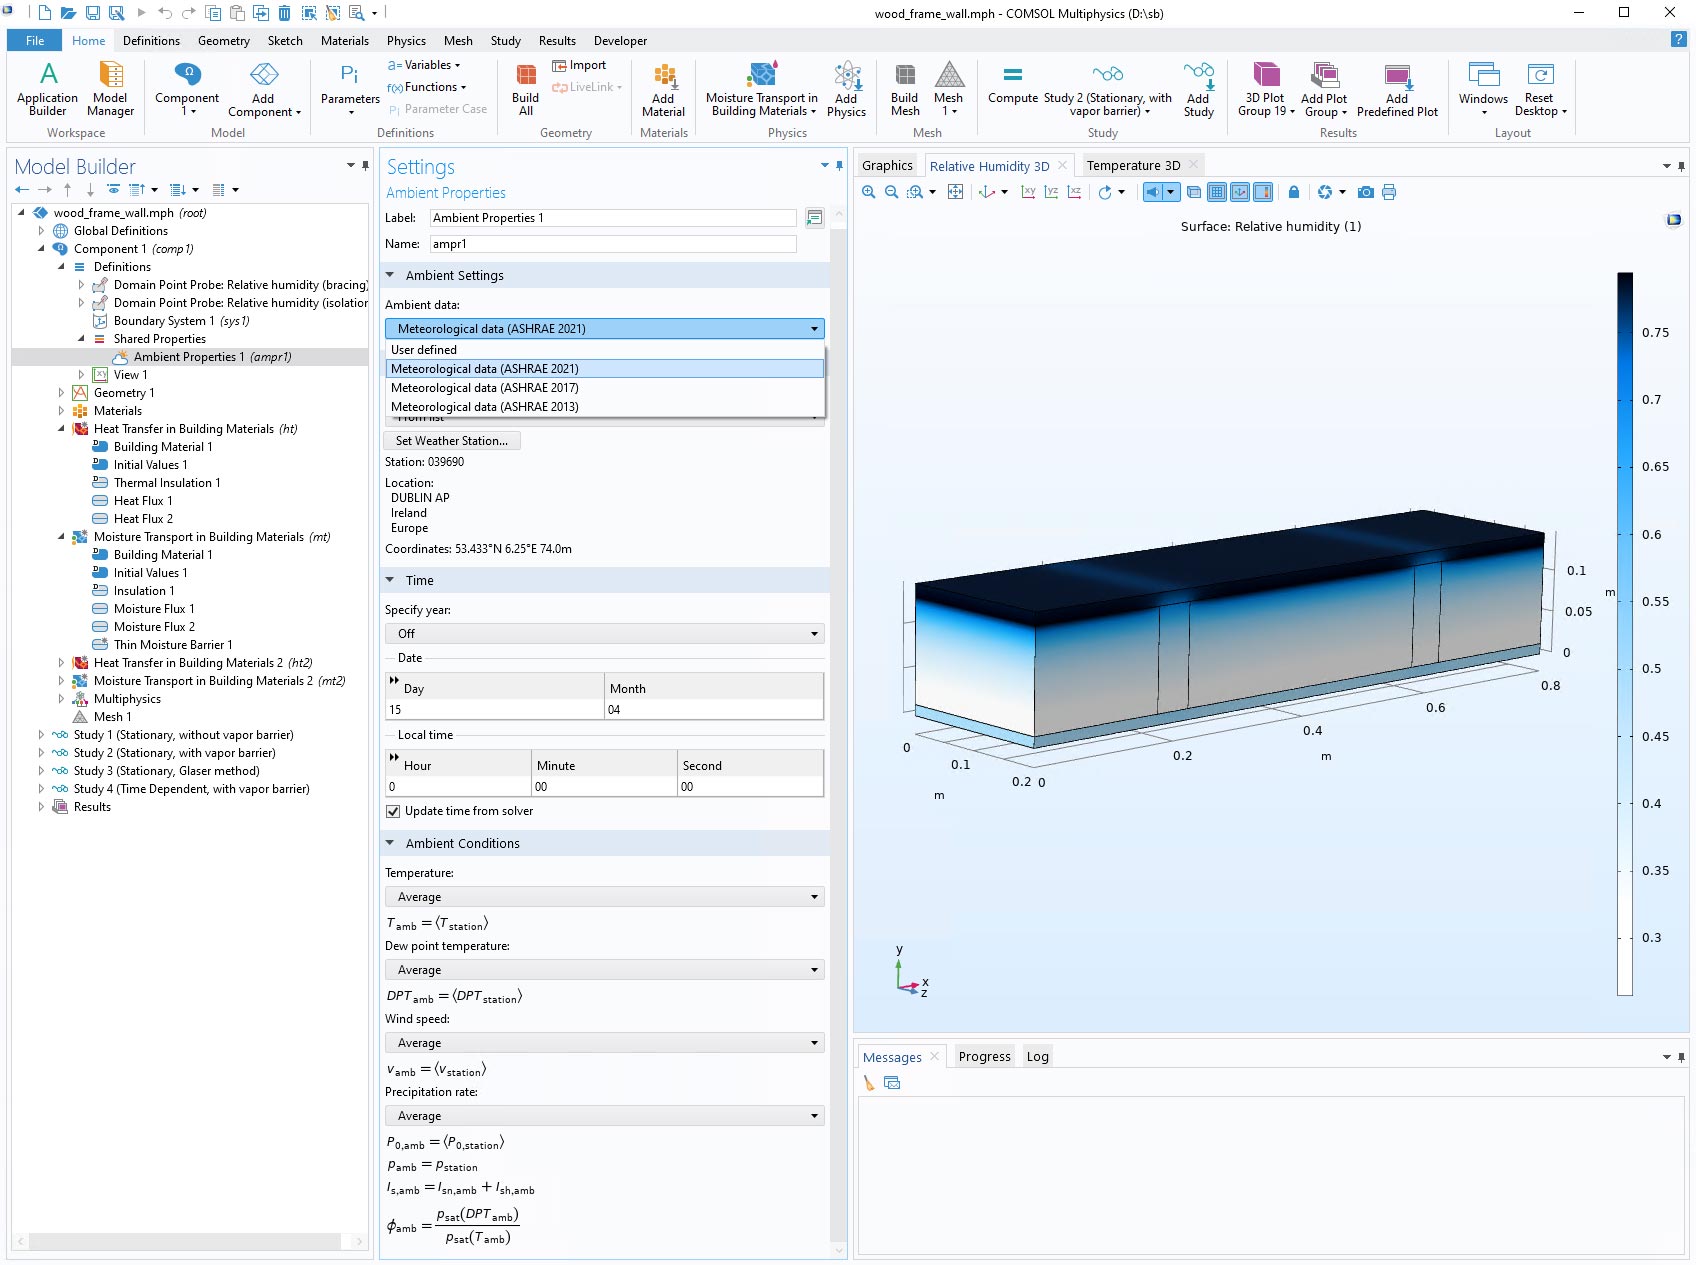 The COMSOL Multiphysics UI showing the Model Builder window with the Ambient Properties node selected, the corresponding Settings window showing the ASHRAE data options, and the wood-frame wall model in the Graphics window.